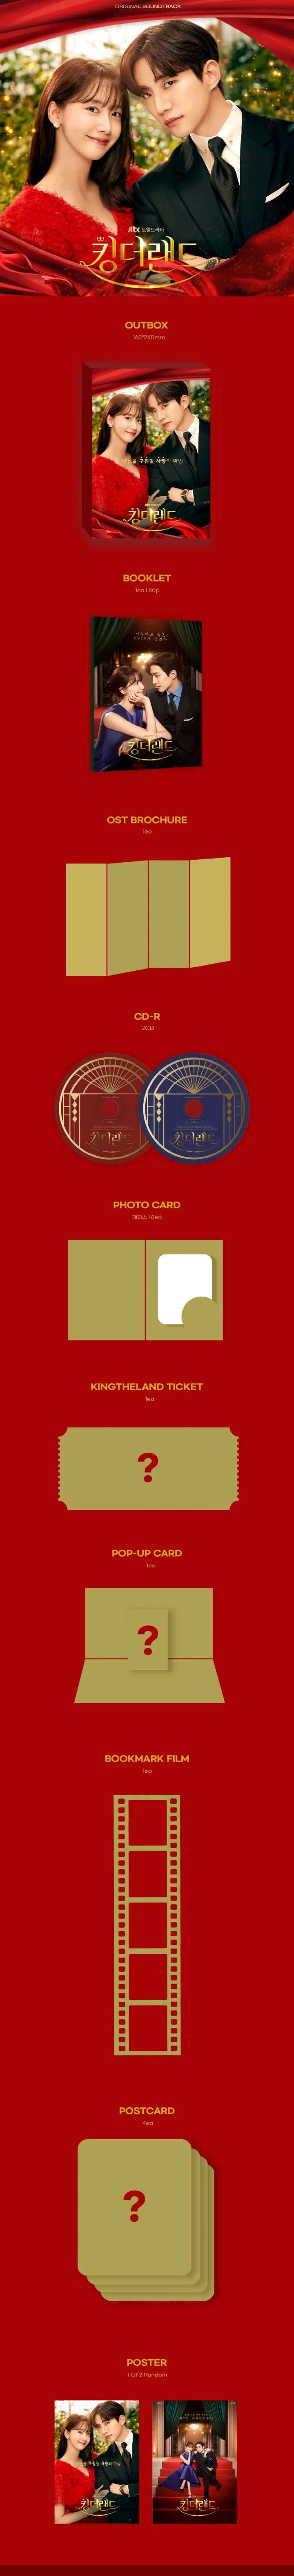 KING THE LAND OST (2 LAYER DIGIPACK) - JTBC DRAMA Infographic